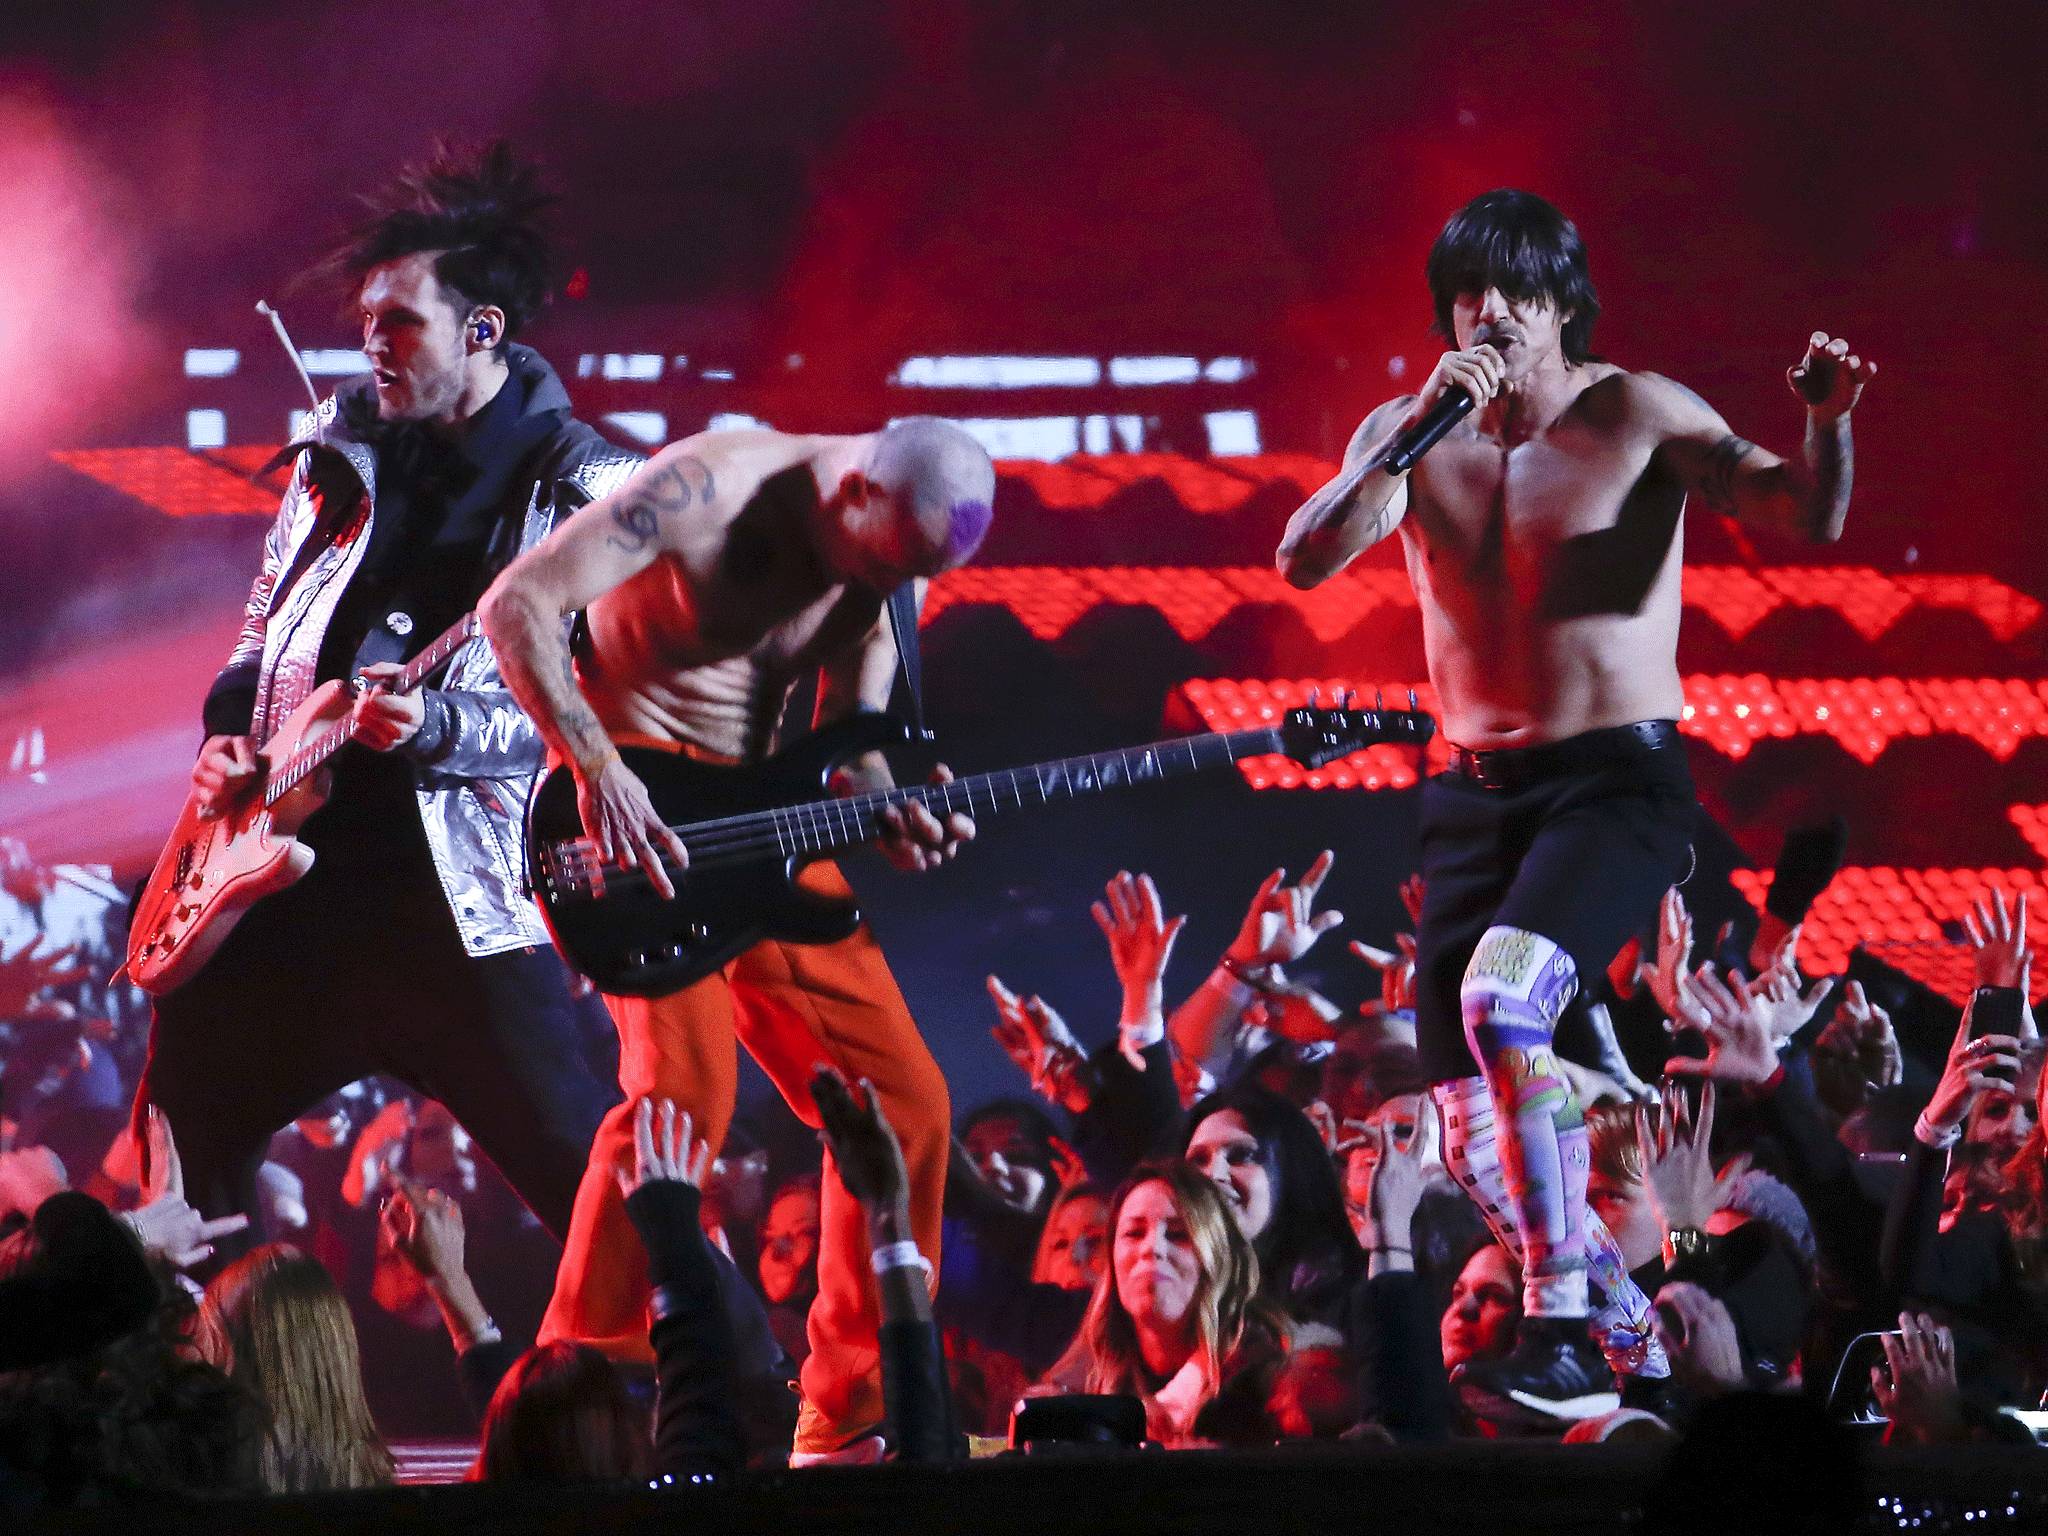 Red Hot Chili Peppers perform at Super Bowl XLVII